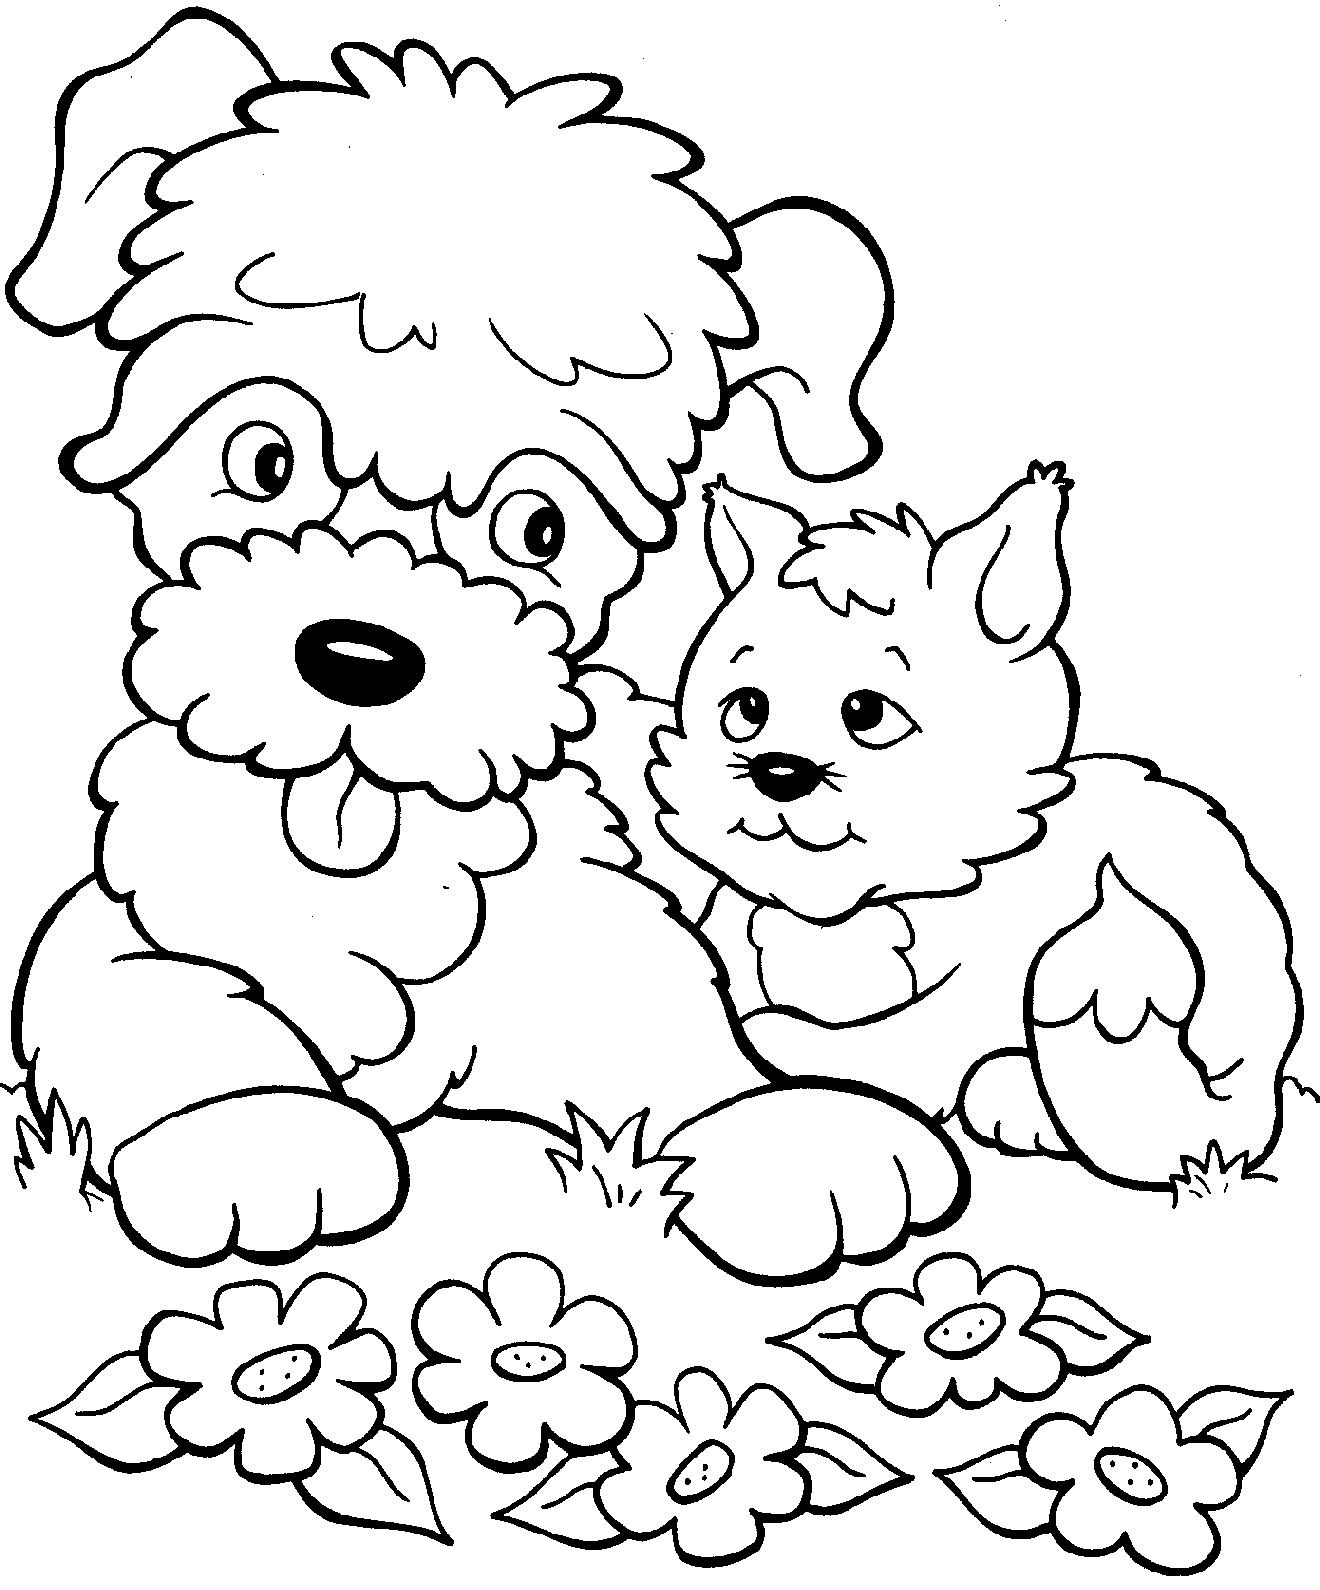 kitty cat pictures to color cute kitten coloring pages getcoloringpagescom kitty pictures to cat color 